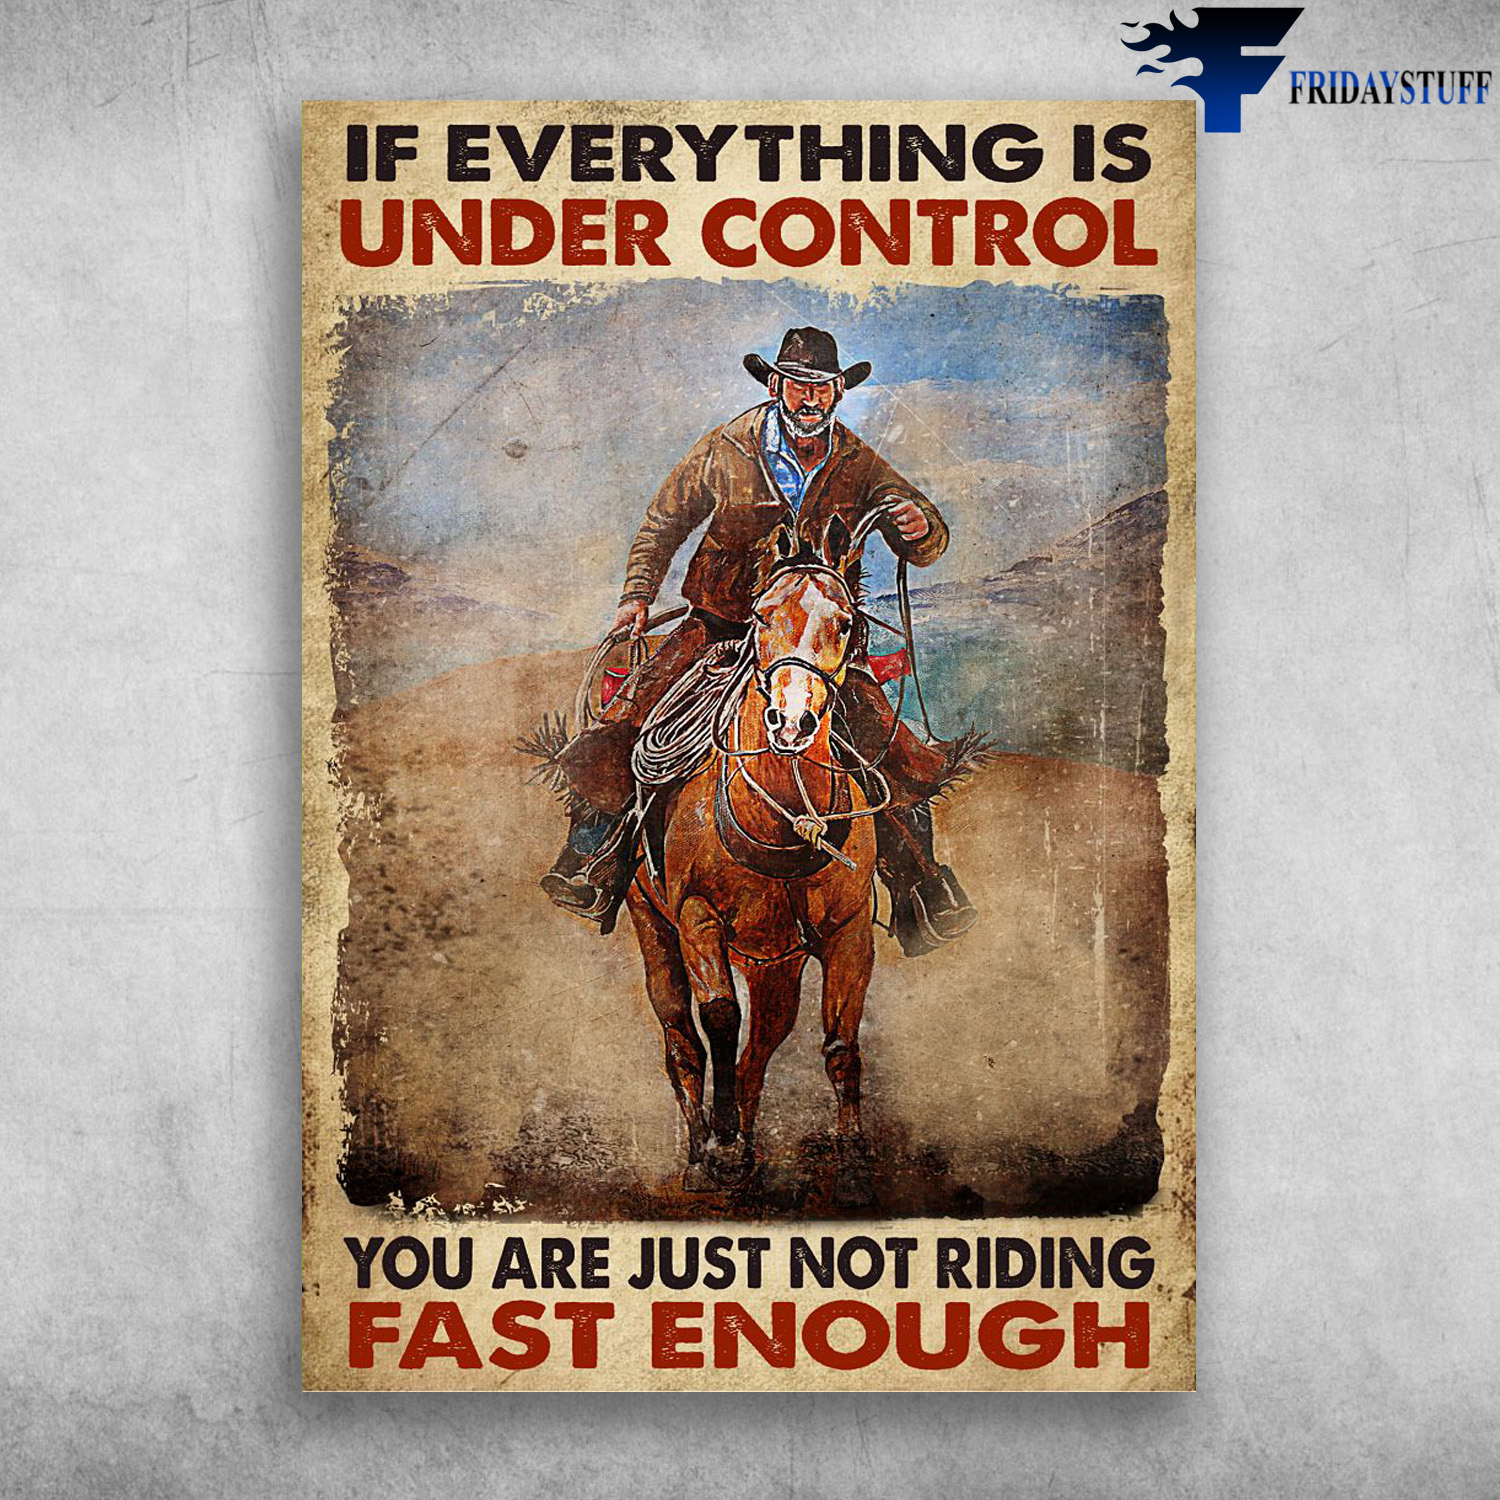 Old Cowboy, Riding Horse - If Everything Is Under Control, You Are Just Not Riding Fast Enough